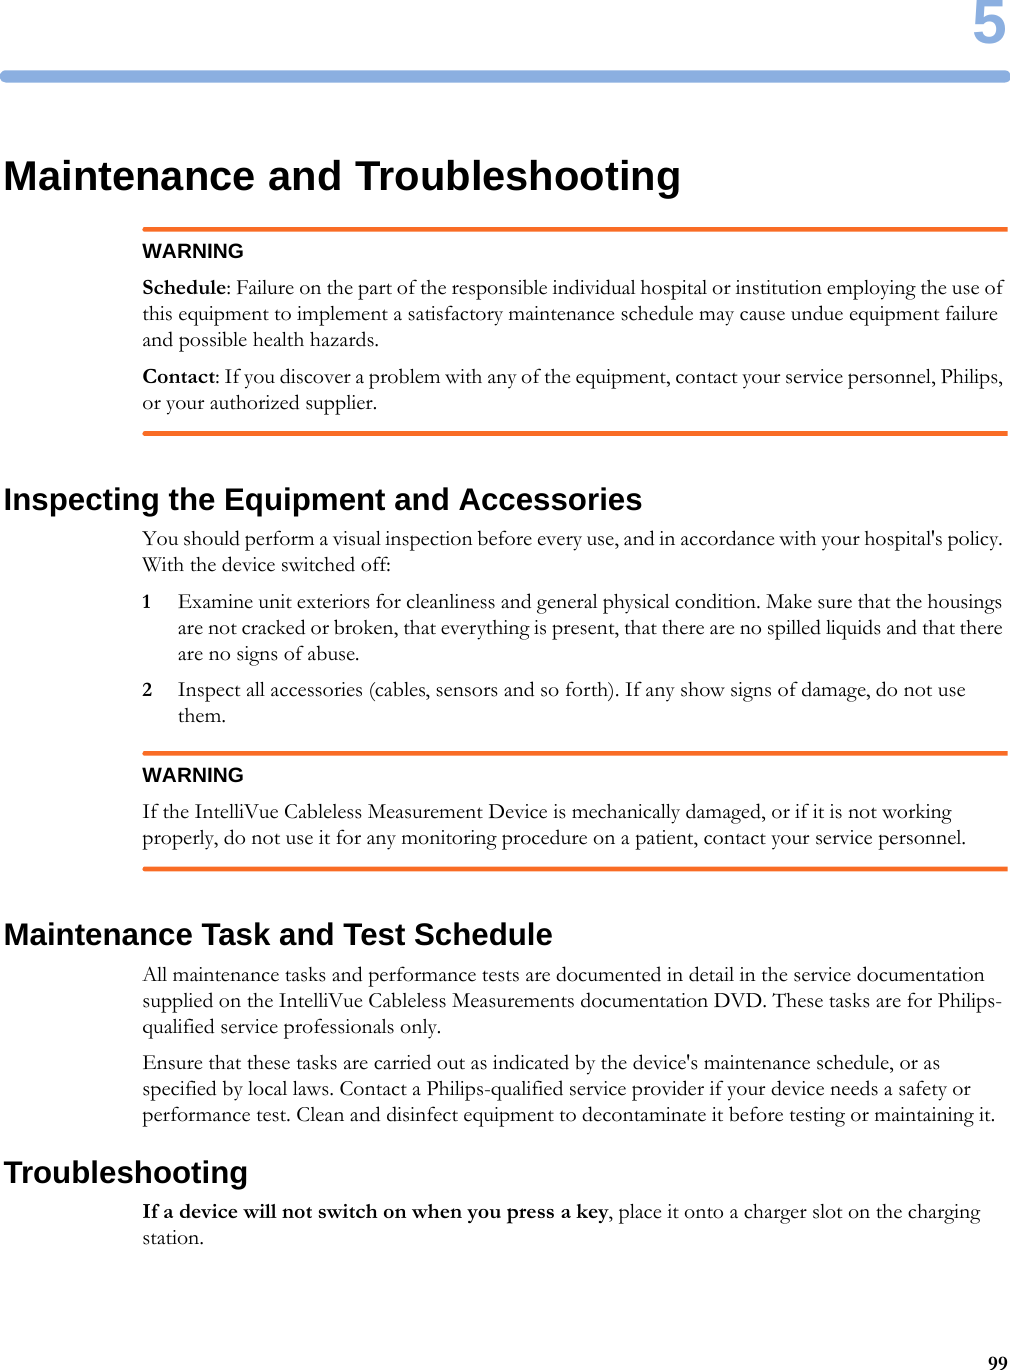 599Maintenance and TroubleshootingWARNINGSchedule: Failure on the part of the responsible individual hospital or institution employing the use of this equipment to implement a satisfactory maintenance schedule may cause undue equipment failure and possible health hazards.Contact: If you discover a problem with any of the equipment, contact your service personnel, Philips, or your authorized supplier.Inspecting the Equipment and AccessoriesYou should perform a visual inspection before every use, and in accordance with your hospital&apos;s policy. With the device switched off:1Examine unit exteriors for cleanliness and general physical condition. Make sure that the housings are not cracked or broken, that everything is present, that there are no spilled liquids and that there are no signs of abuse.2Inspect all accessories (cables, sensors and so forth). If any show signs of damage, do not use them.WARNINGIf the IntelliVue Cableless Measurement Device is mechanically damaged, or if it is not working properly, do not use it for any monitoring procedure on a patient, contact your service personnel.Maintenance Task and Test ScheduleAll maintenance tasks and performance tests are documented in detail in the service documentation supplied on the IntelliVue Cableless Measurements documentation DVD. These tasks are for Philips-qualified service professionals only.Ensure that these tasks are carried out as indicated by the device&apos;s maintenance schedule, or as specified by local laws. Contact a Philips-qualified service provider if your device needs a safety or performance test. Clean and disinfect equipment to decontaminate it before testing or maintaining it.TroubleshootingIf a device will not switch on when you press a key, place it onto a charger slot on the charging station.